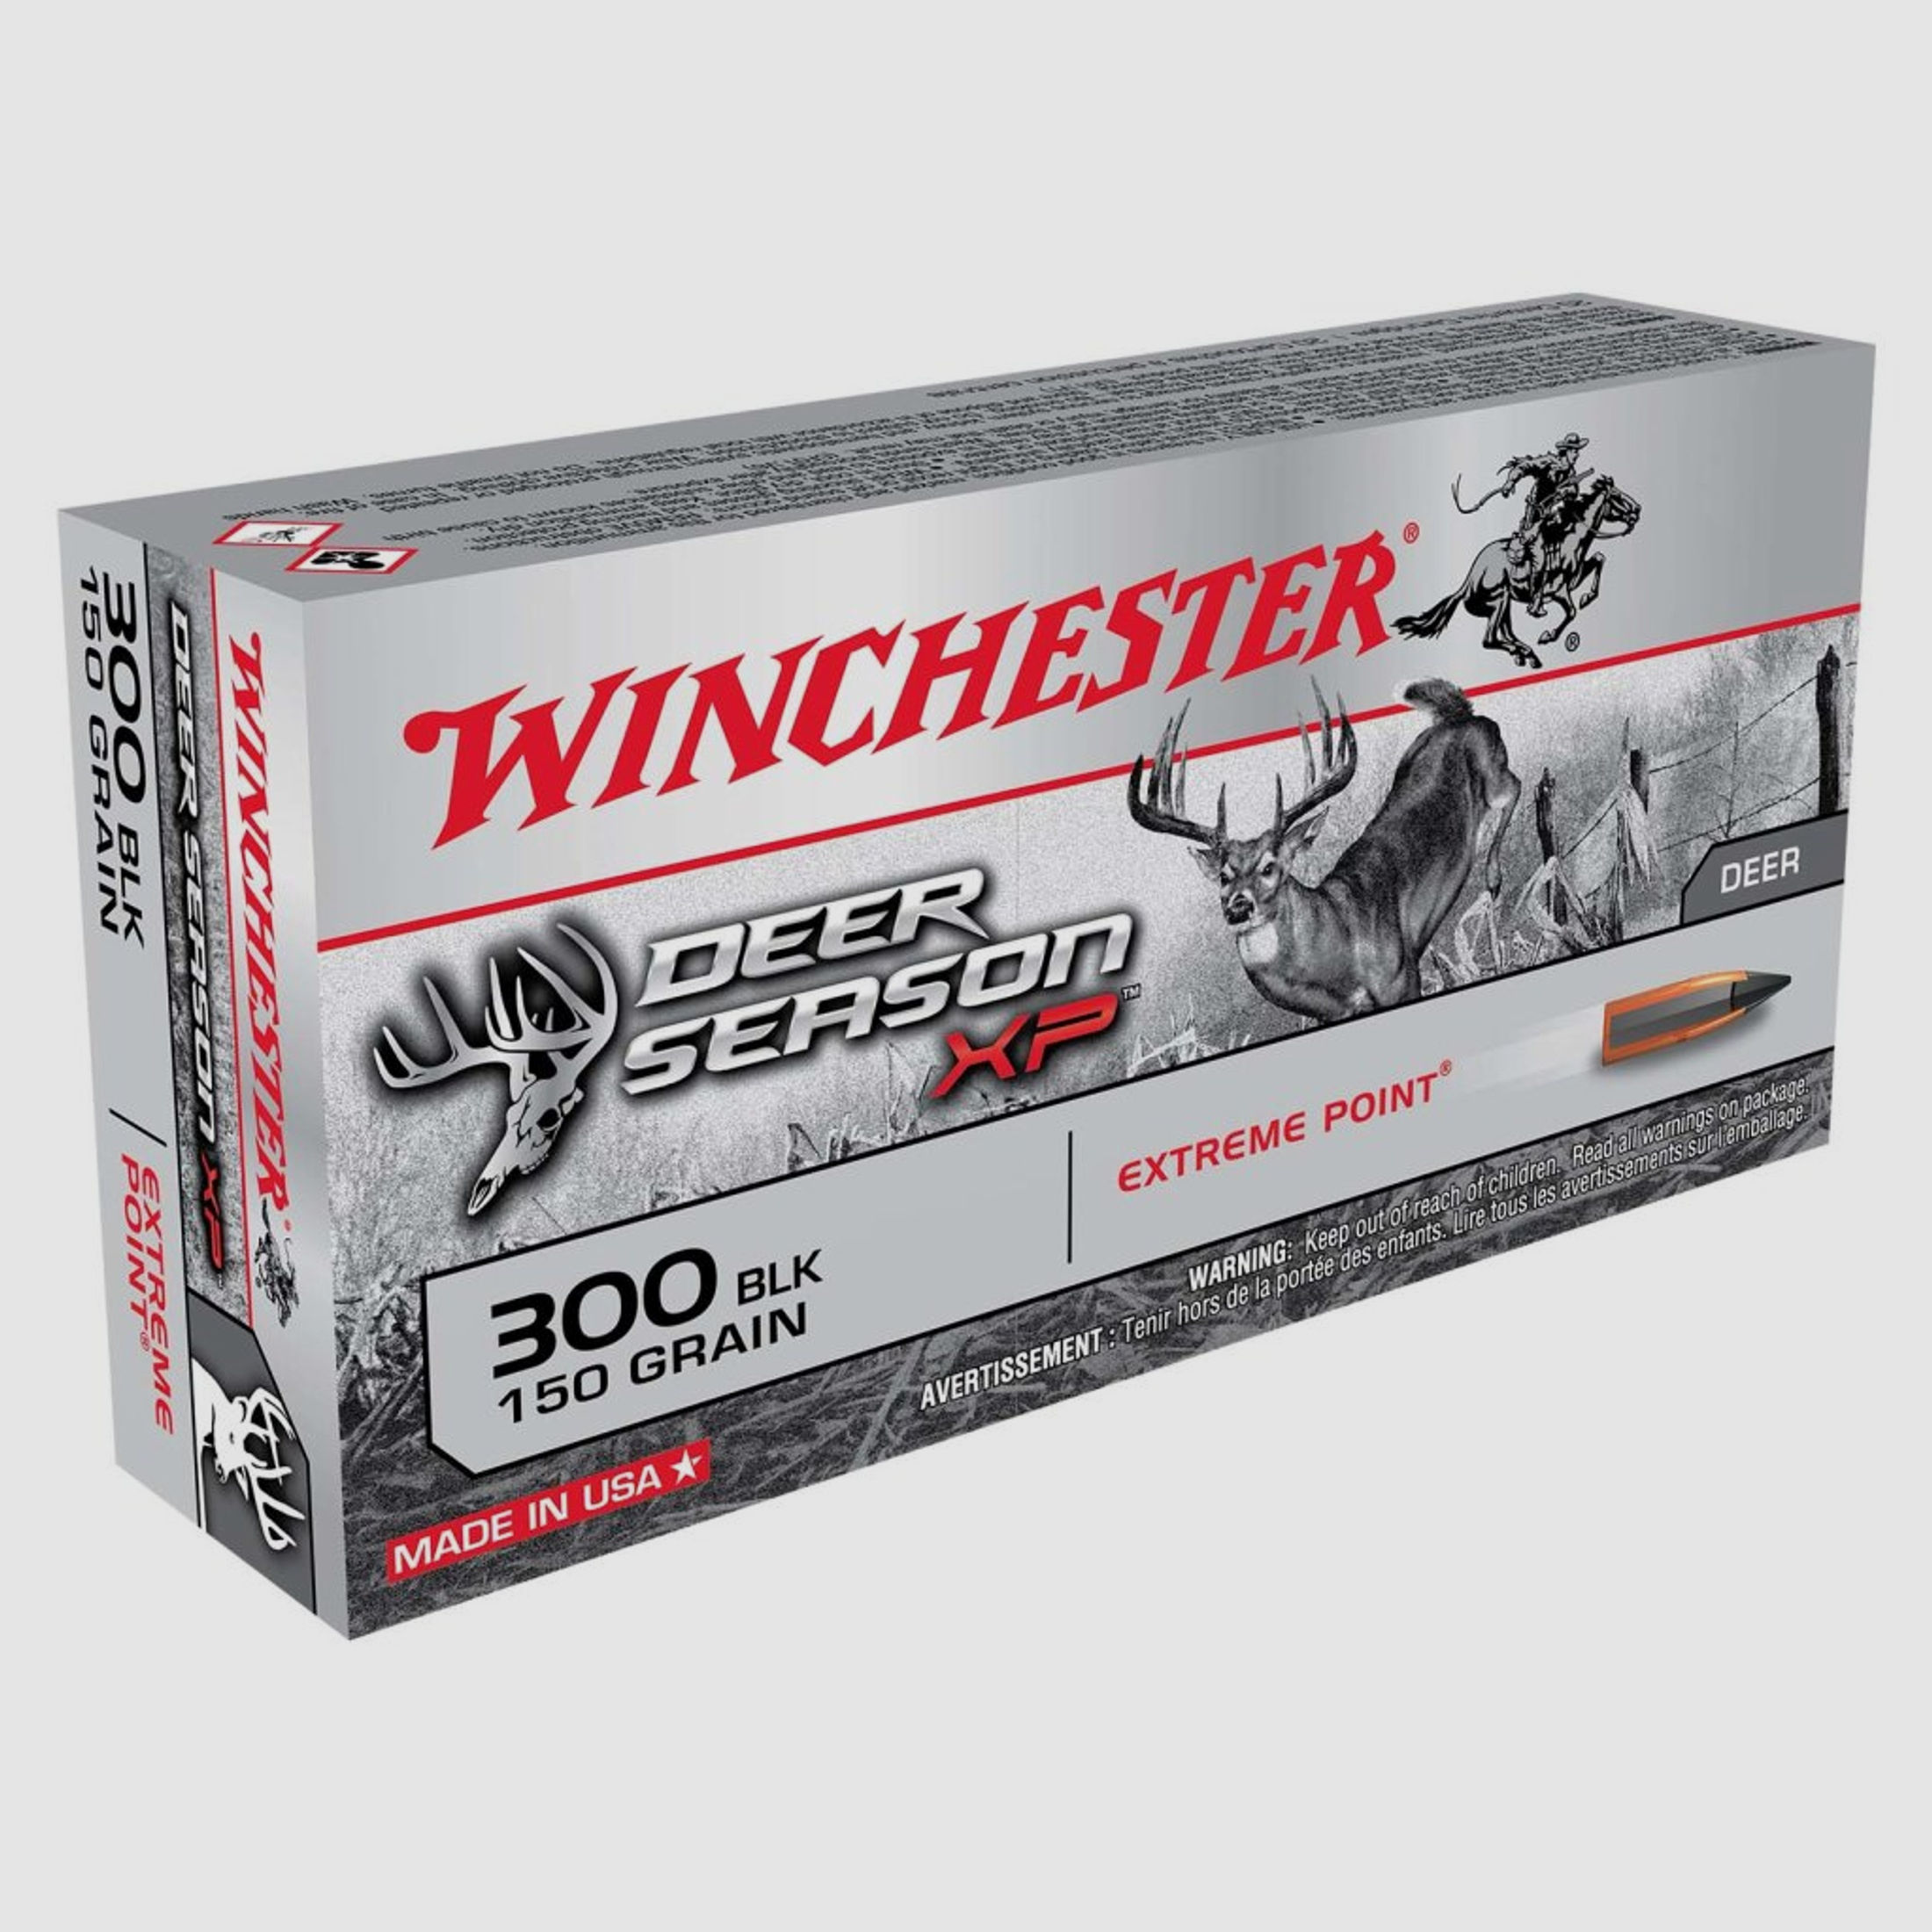 WINCHESTER .300 Blackout